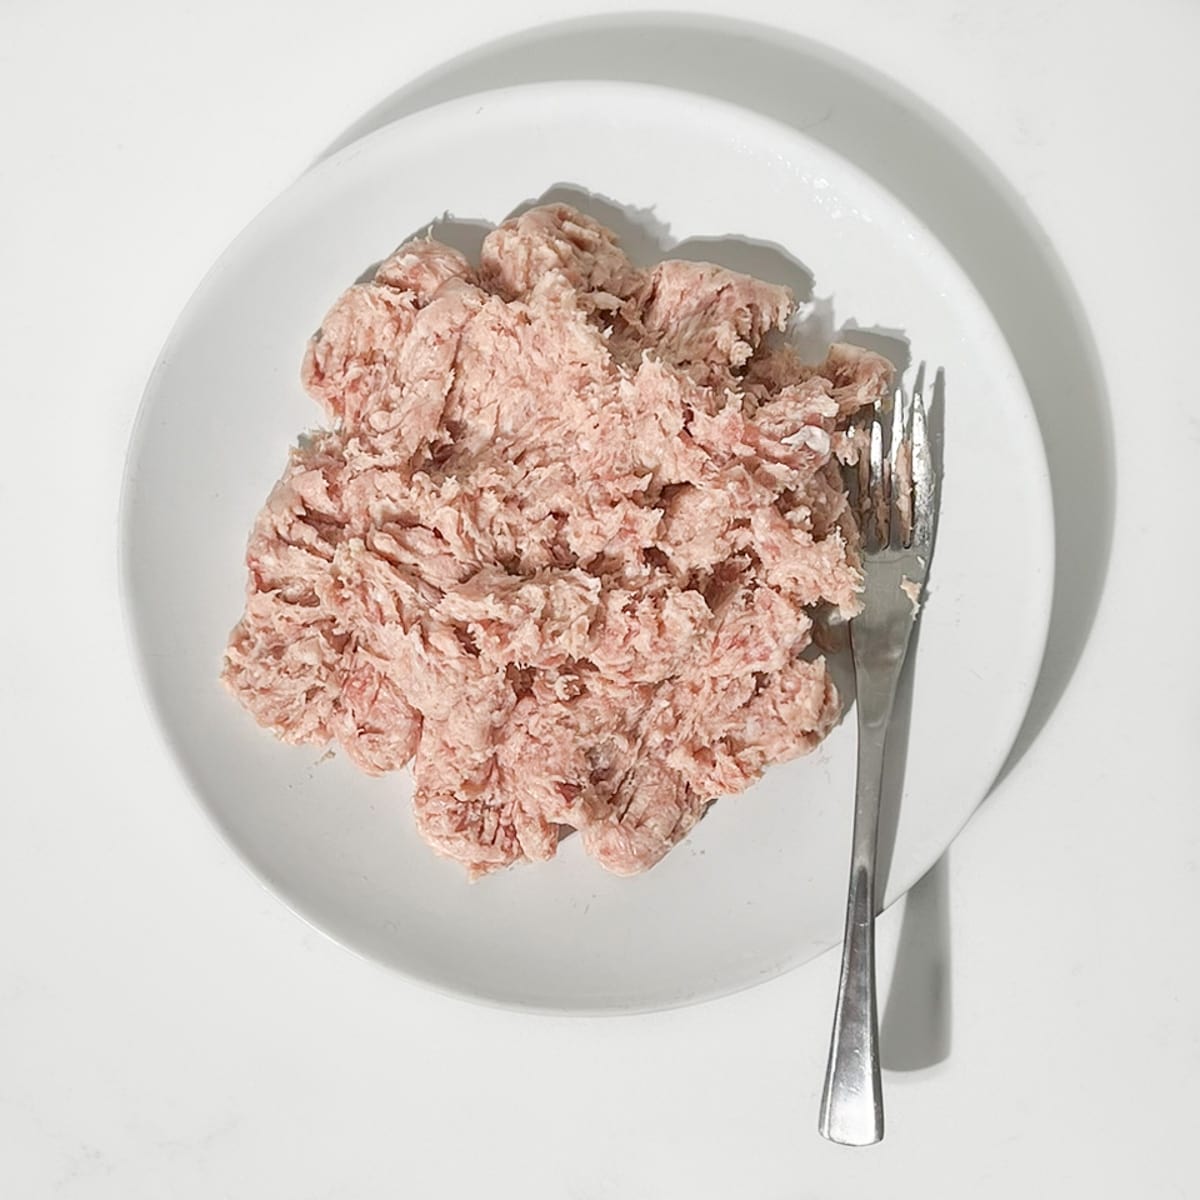 Breaking up the sausage meat with a fork on a white plate.